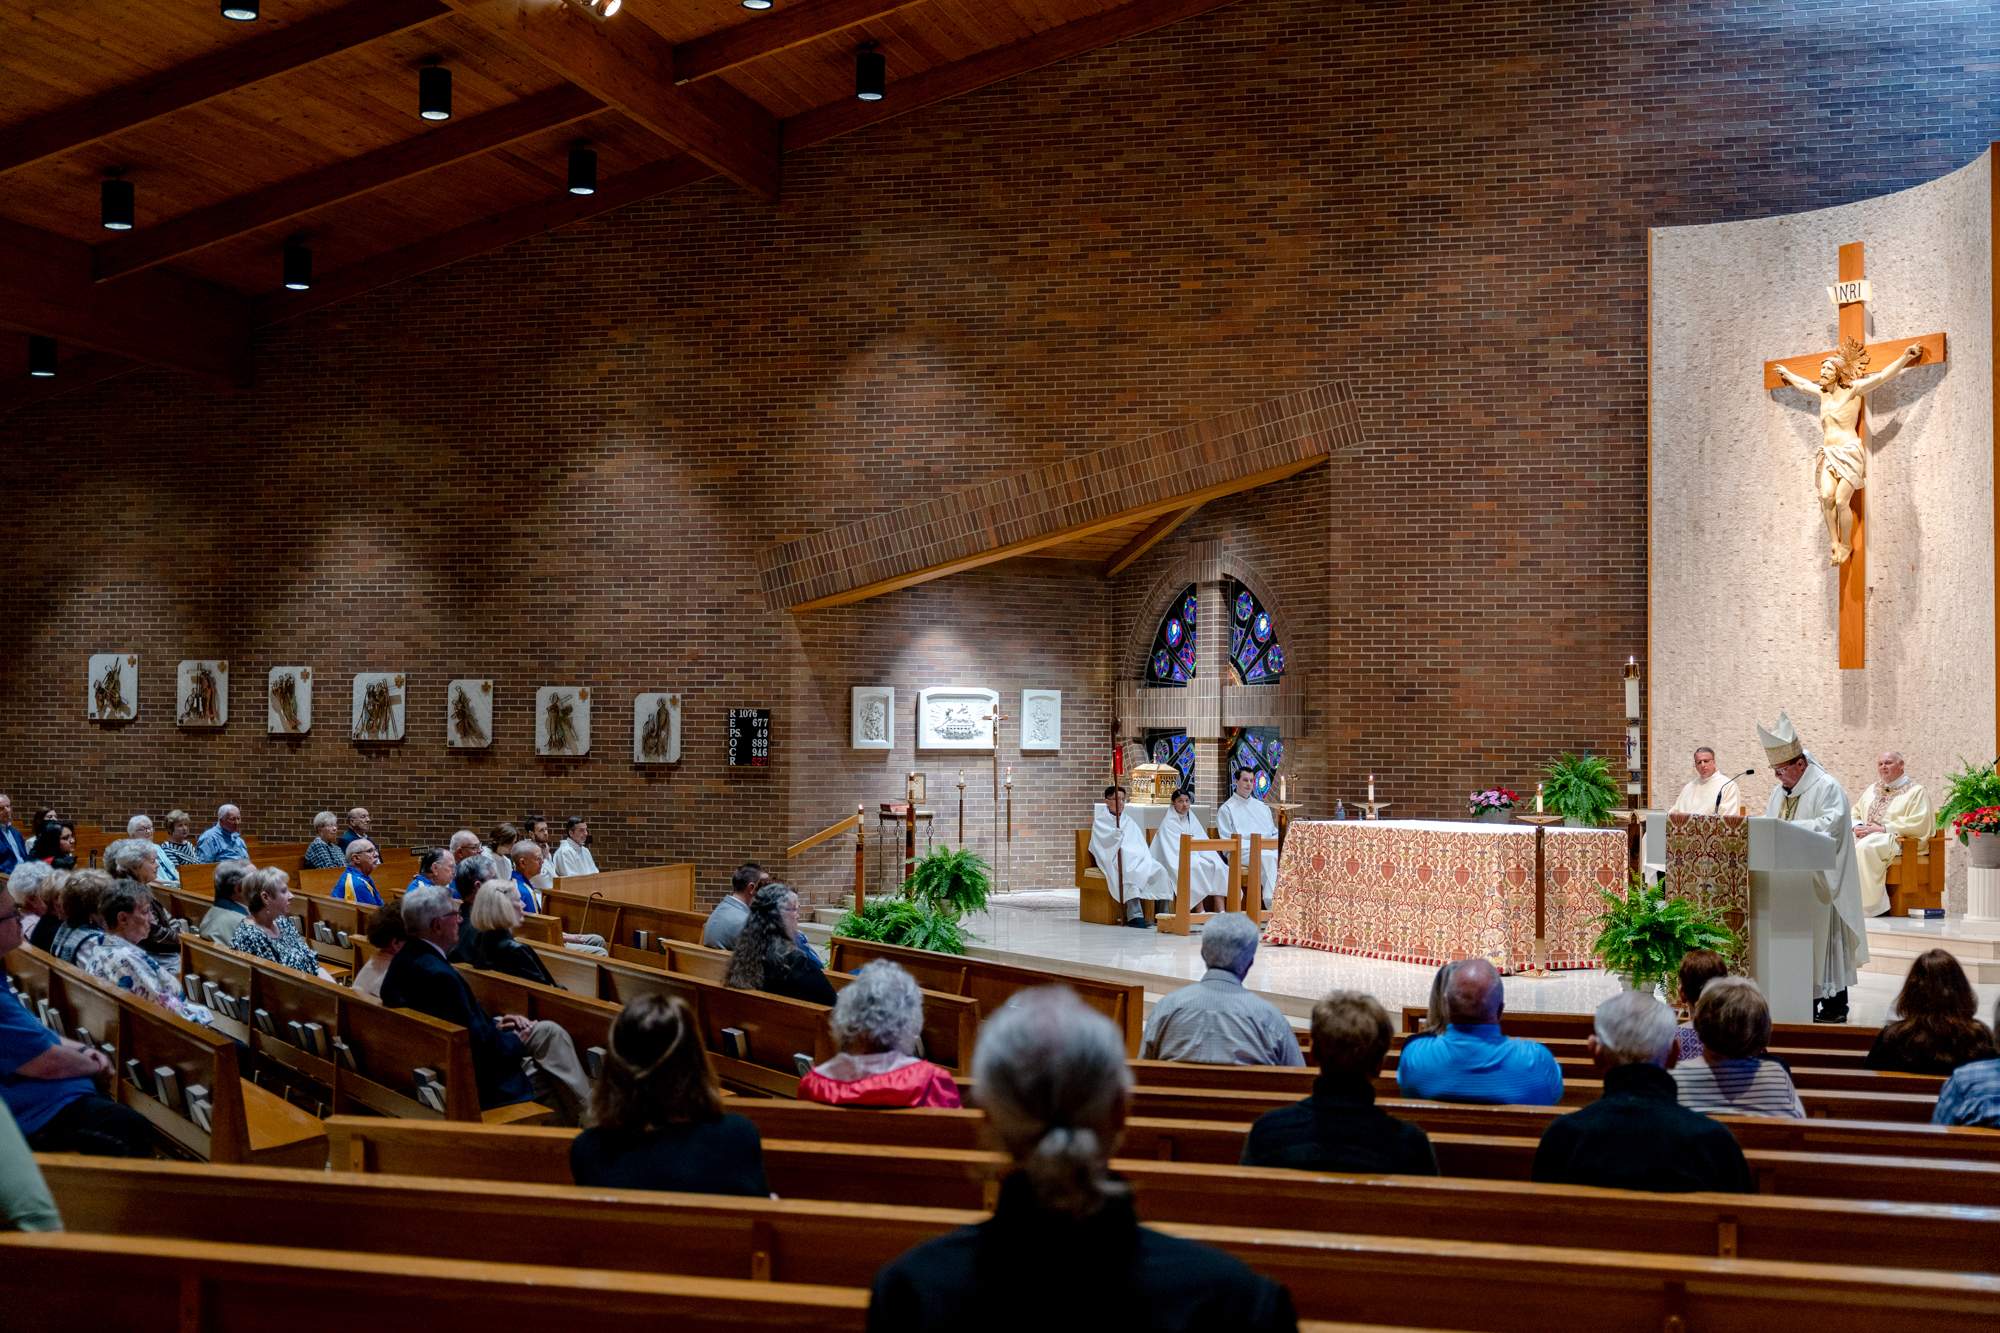 Seated parishioners at Our Lady of Sorrows Parish watch Mass